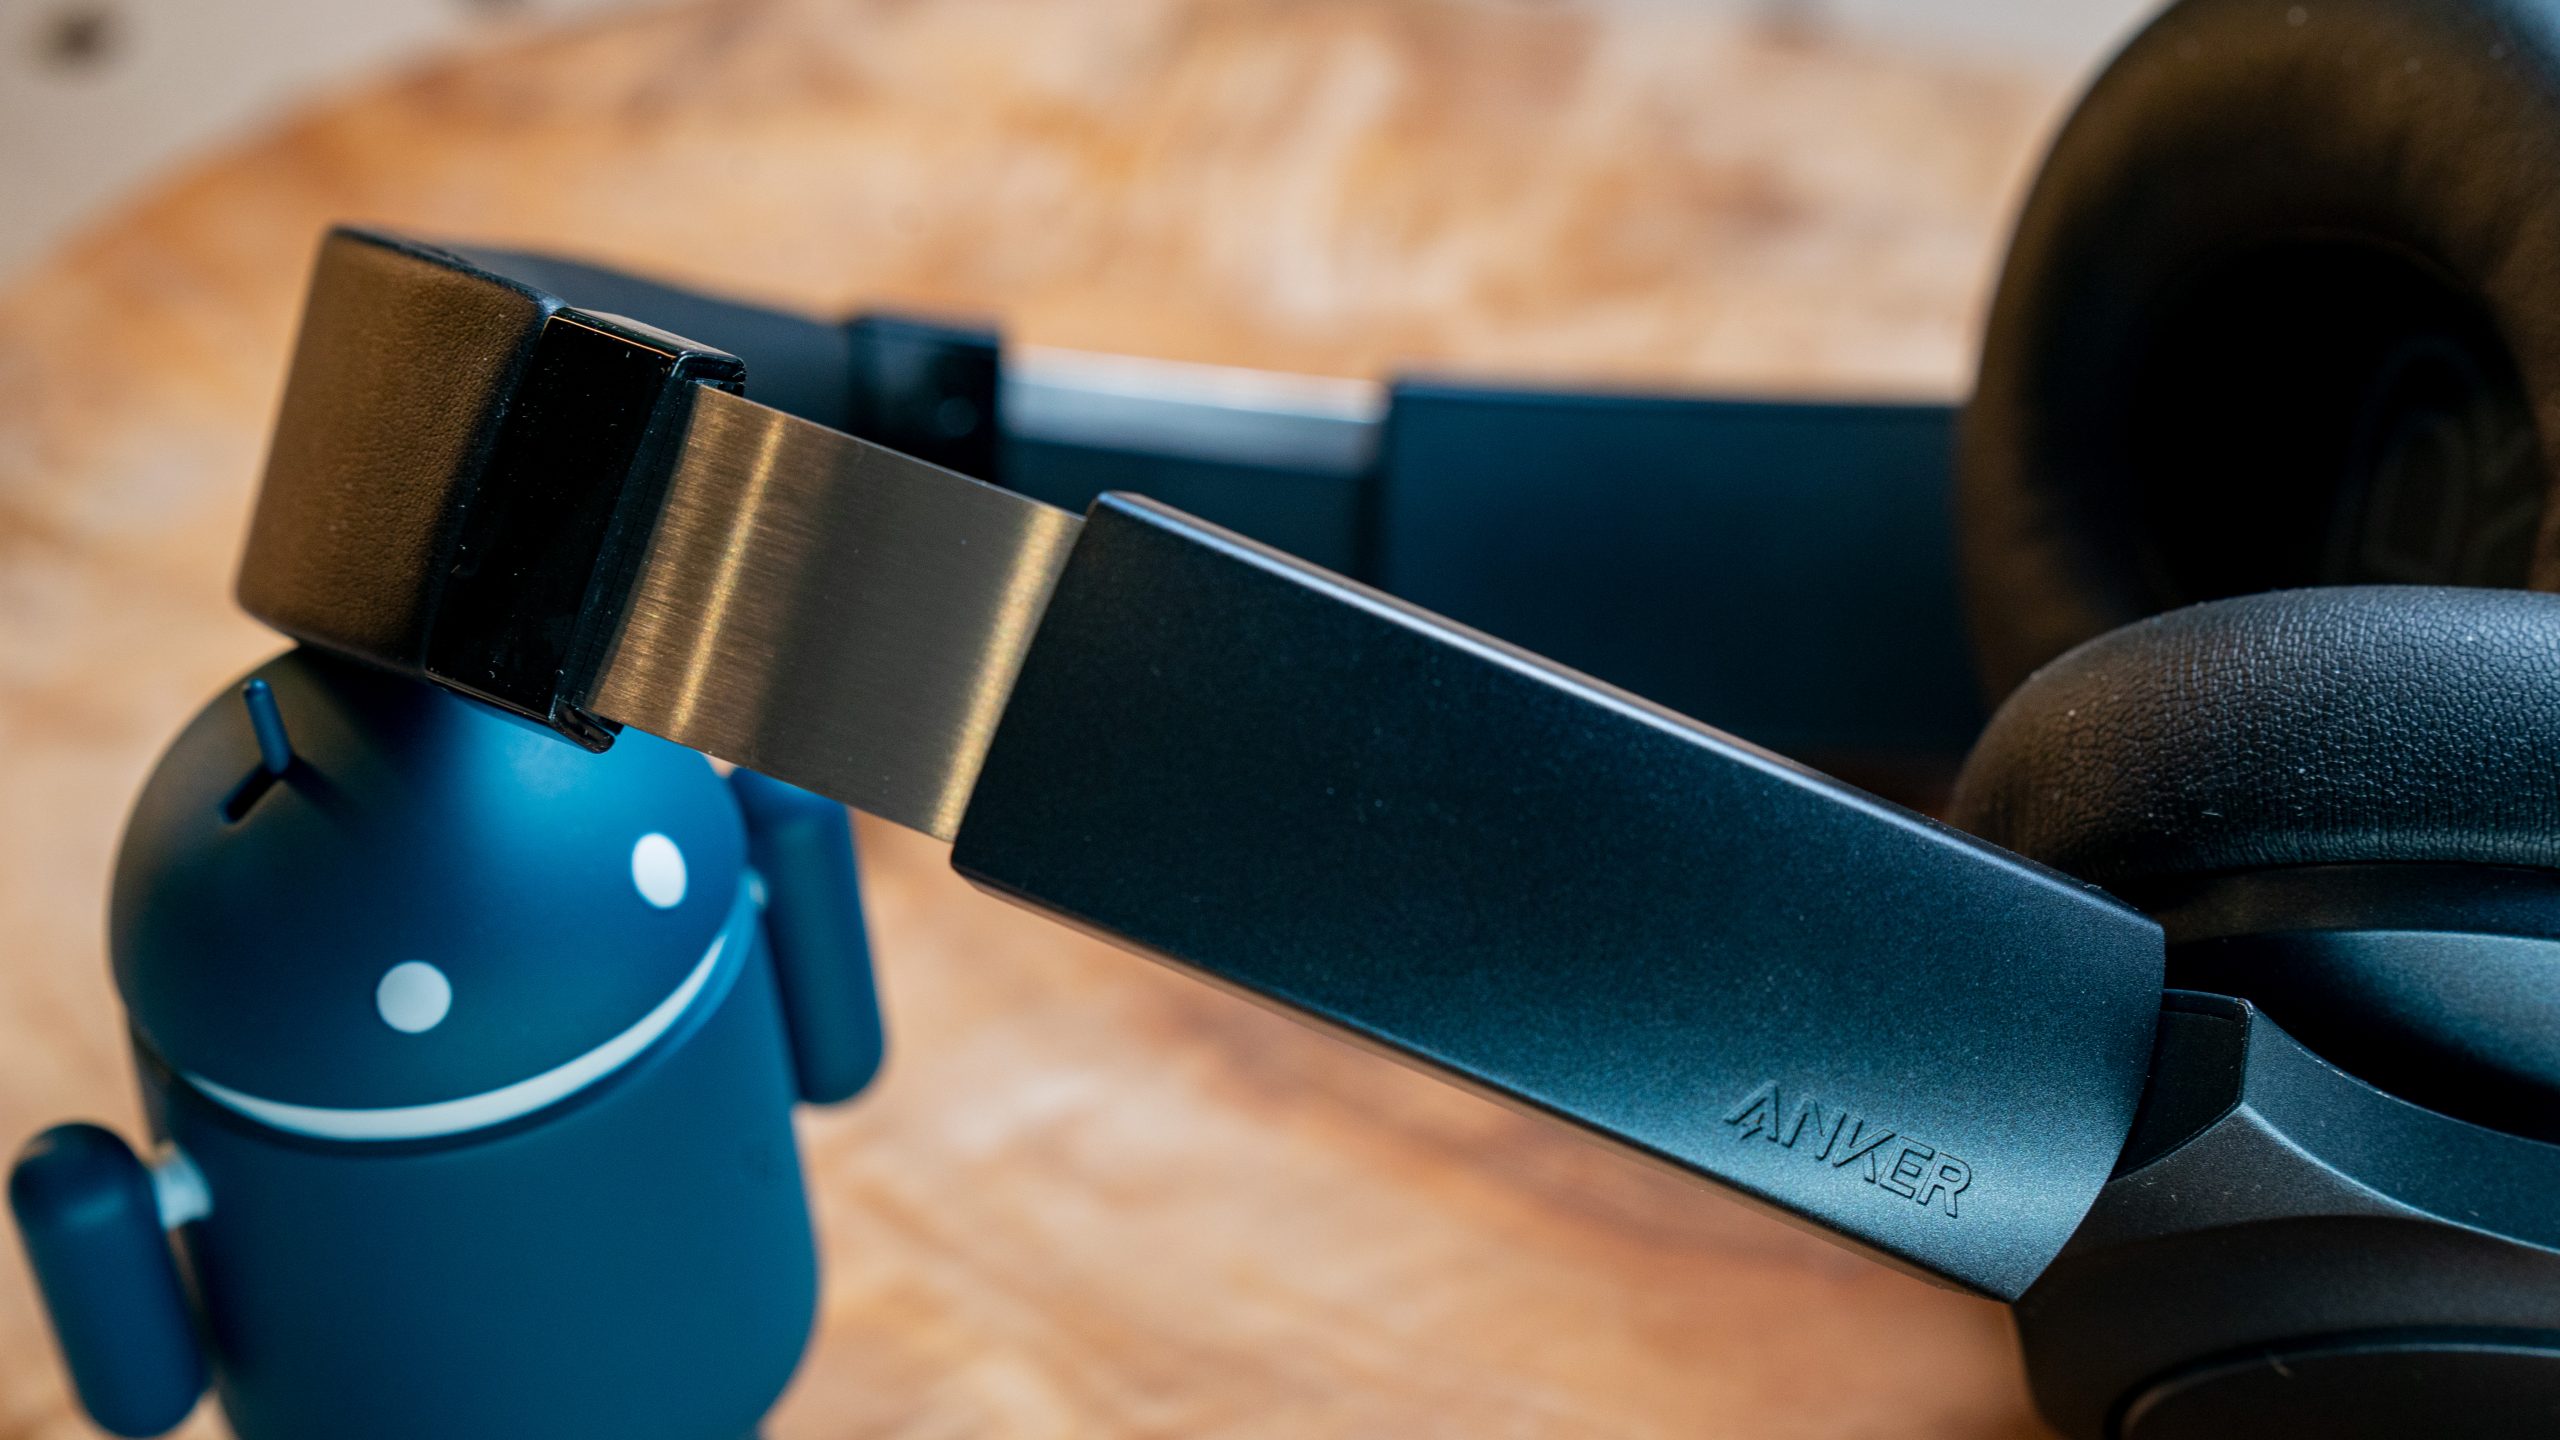 The Anker Soundcore Life Q20 headband stretched out on an Android figurine.